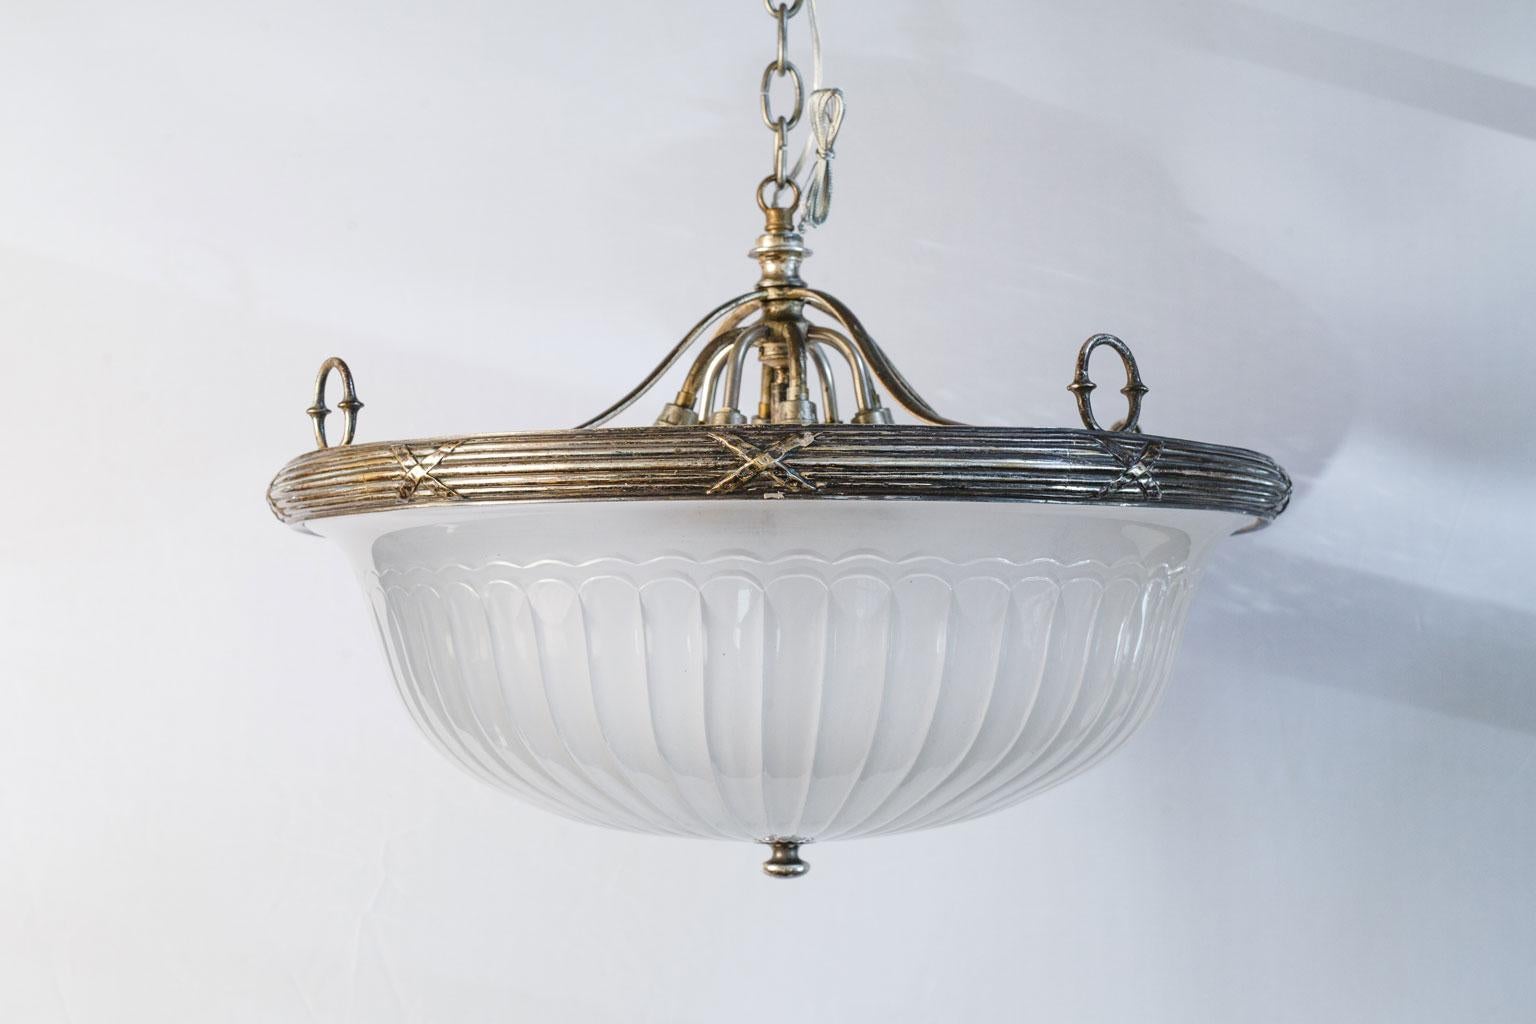 Early 20th Century French Art Deco Frosted Glass and Silver-Plated Pendant of Grand Size